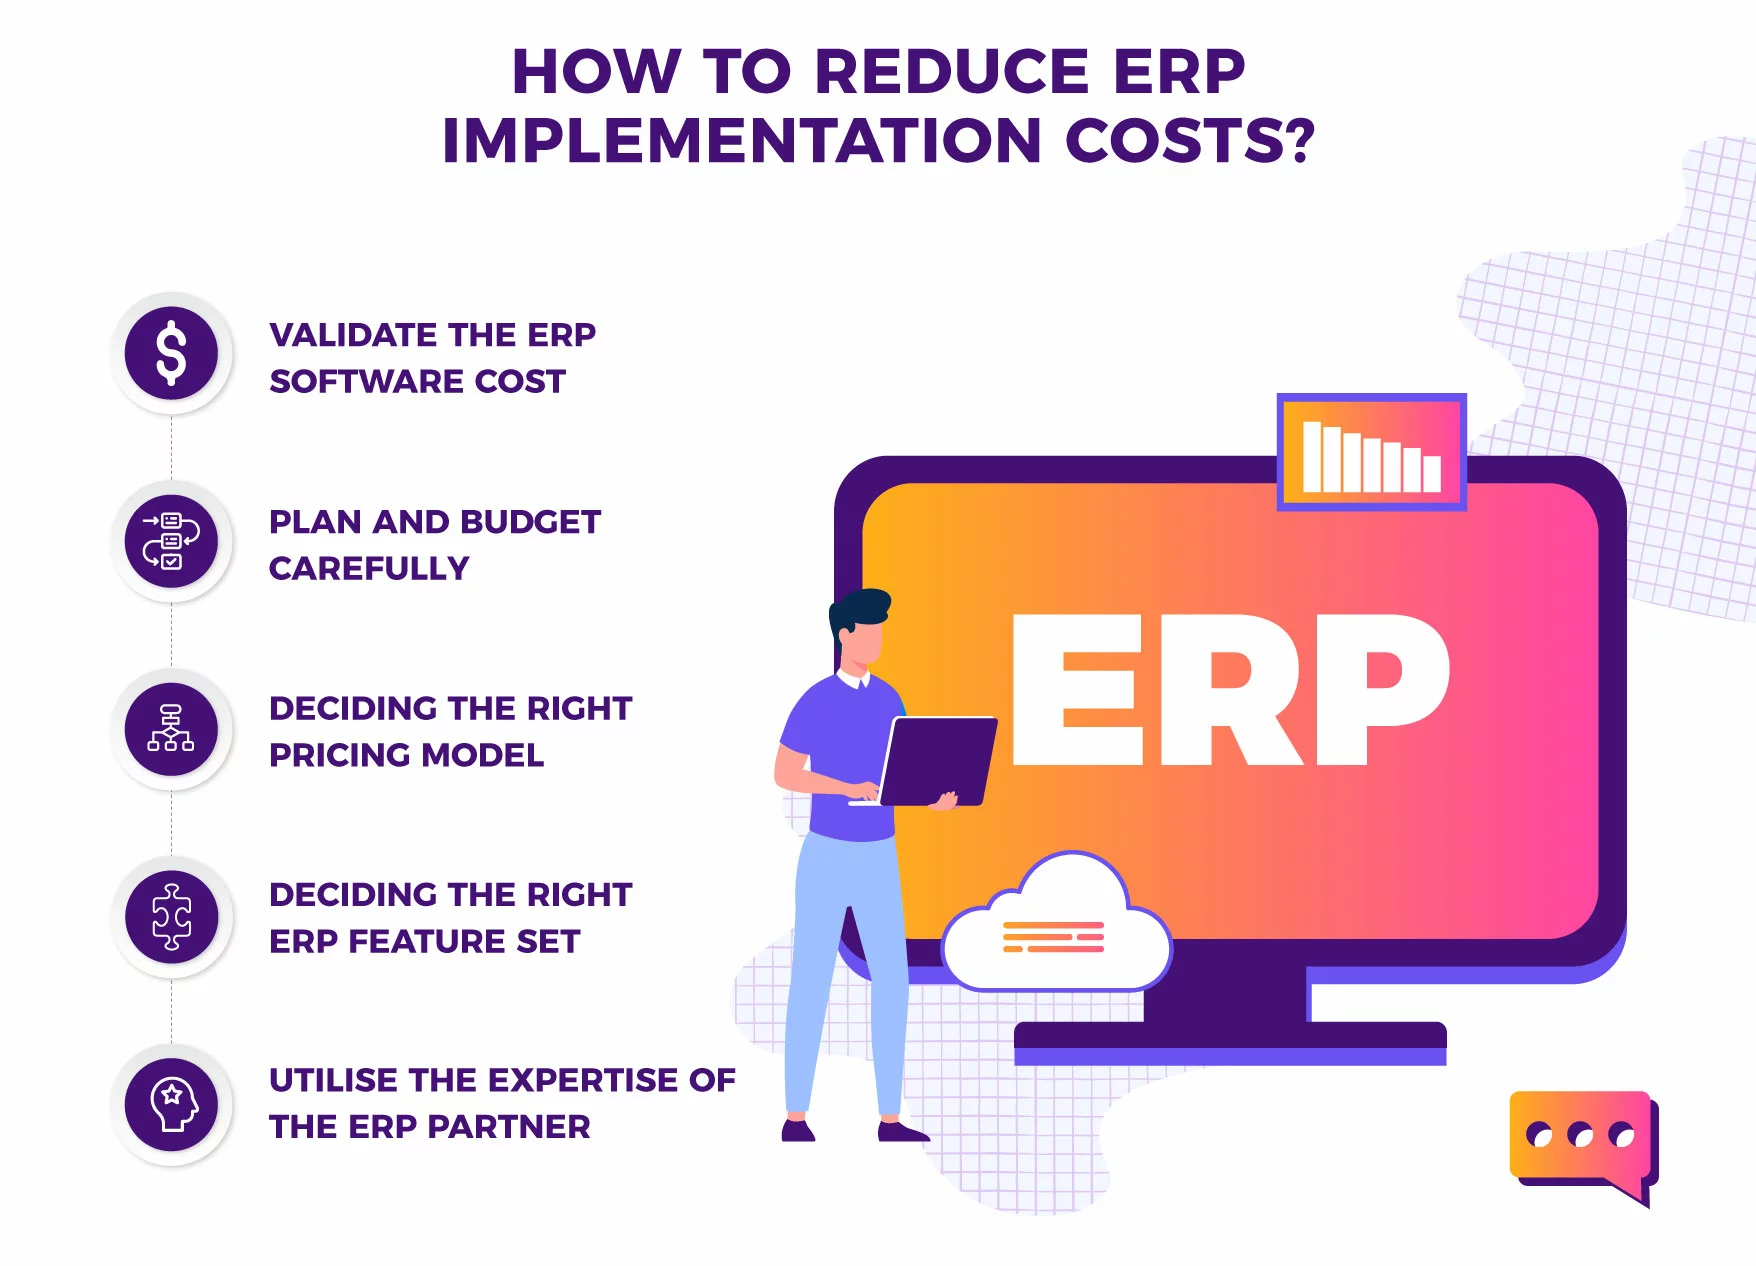 How To Reduce ERP Implementation Costs